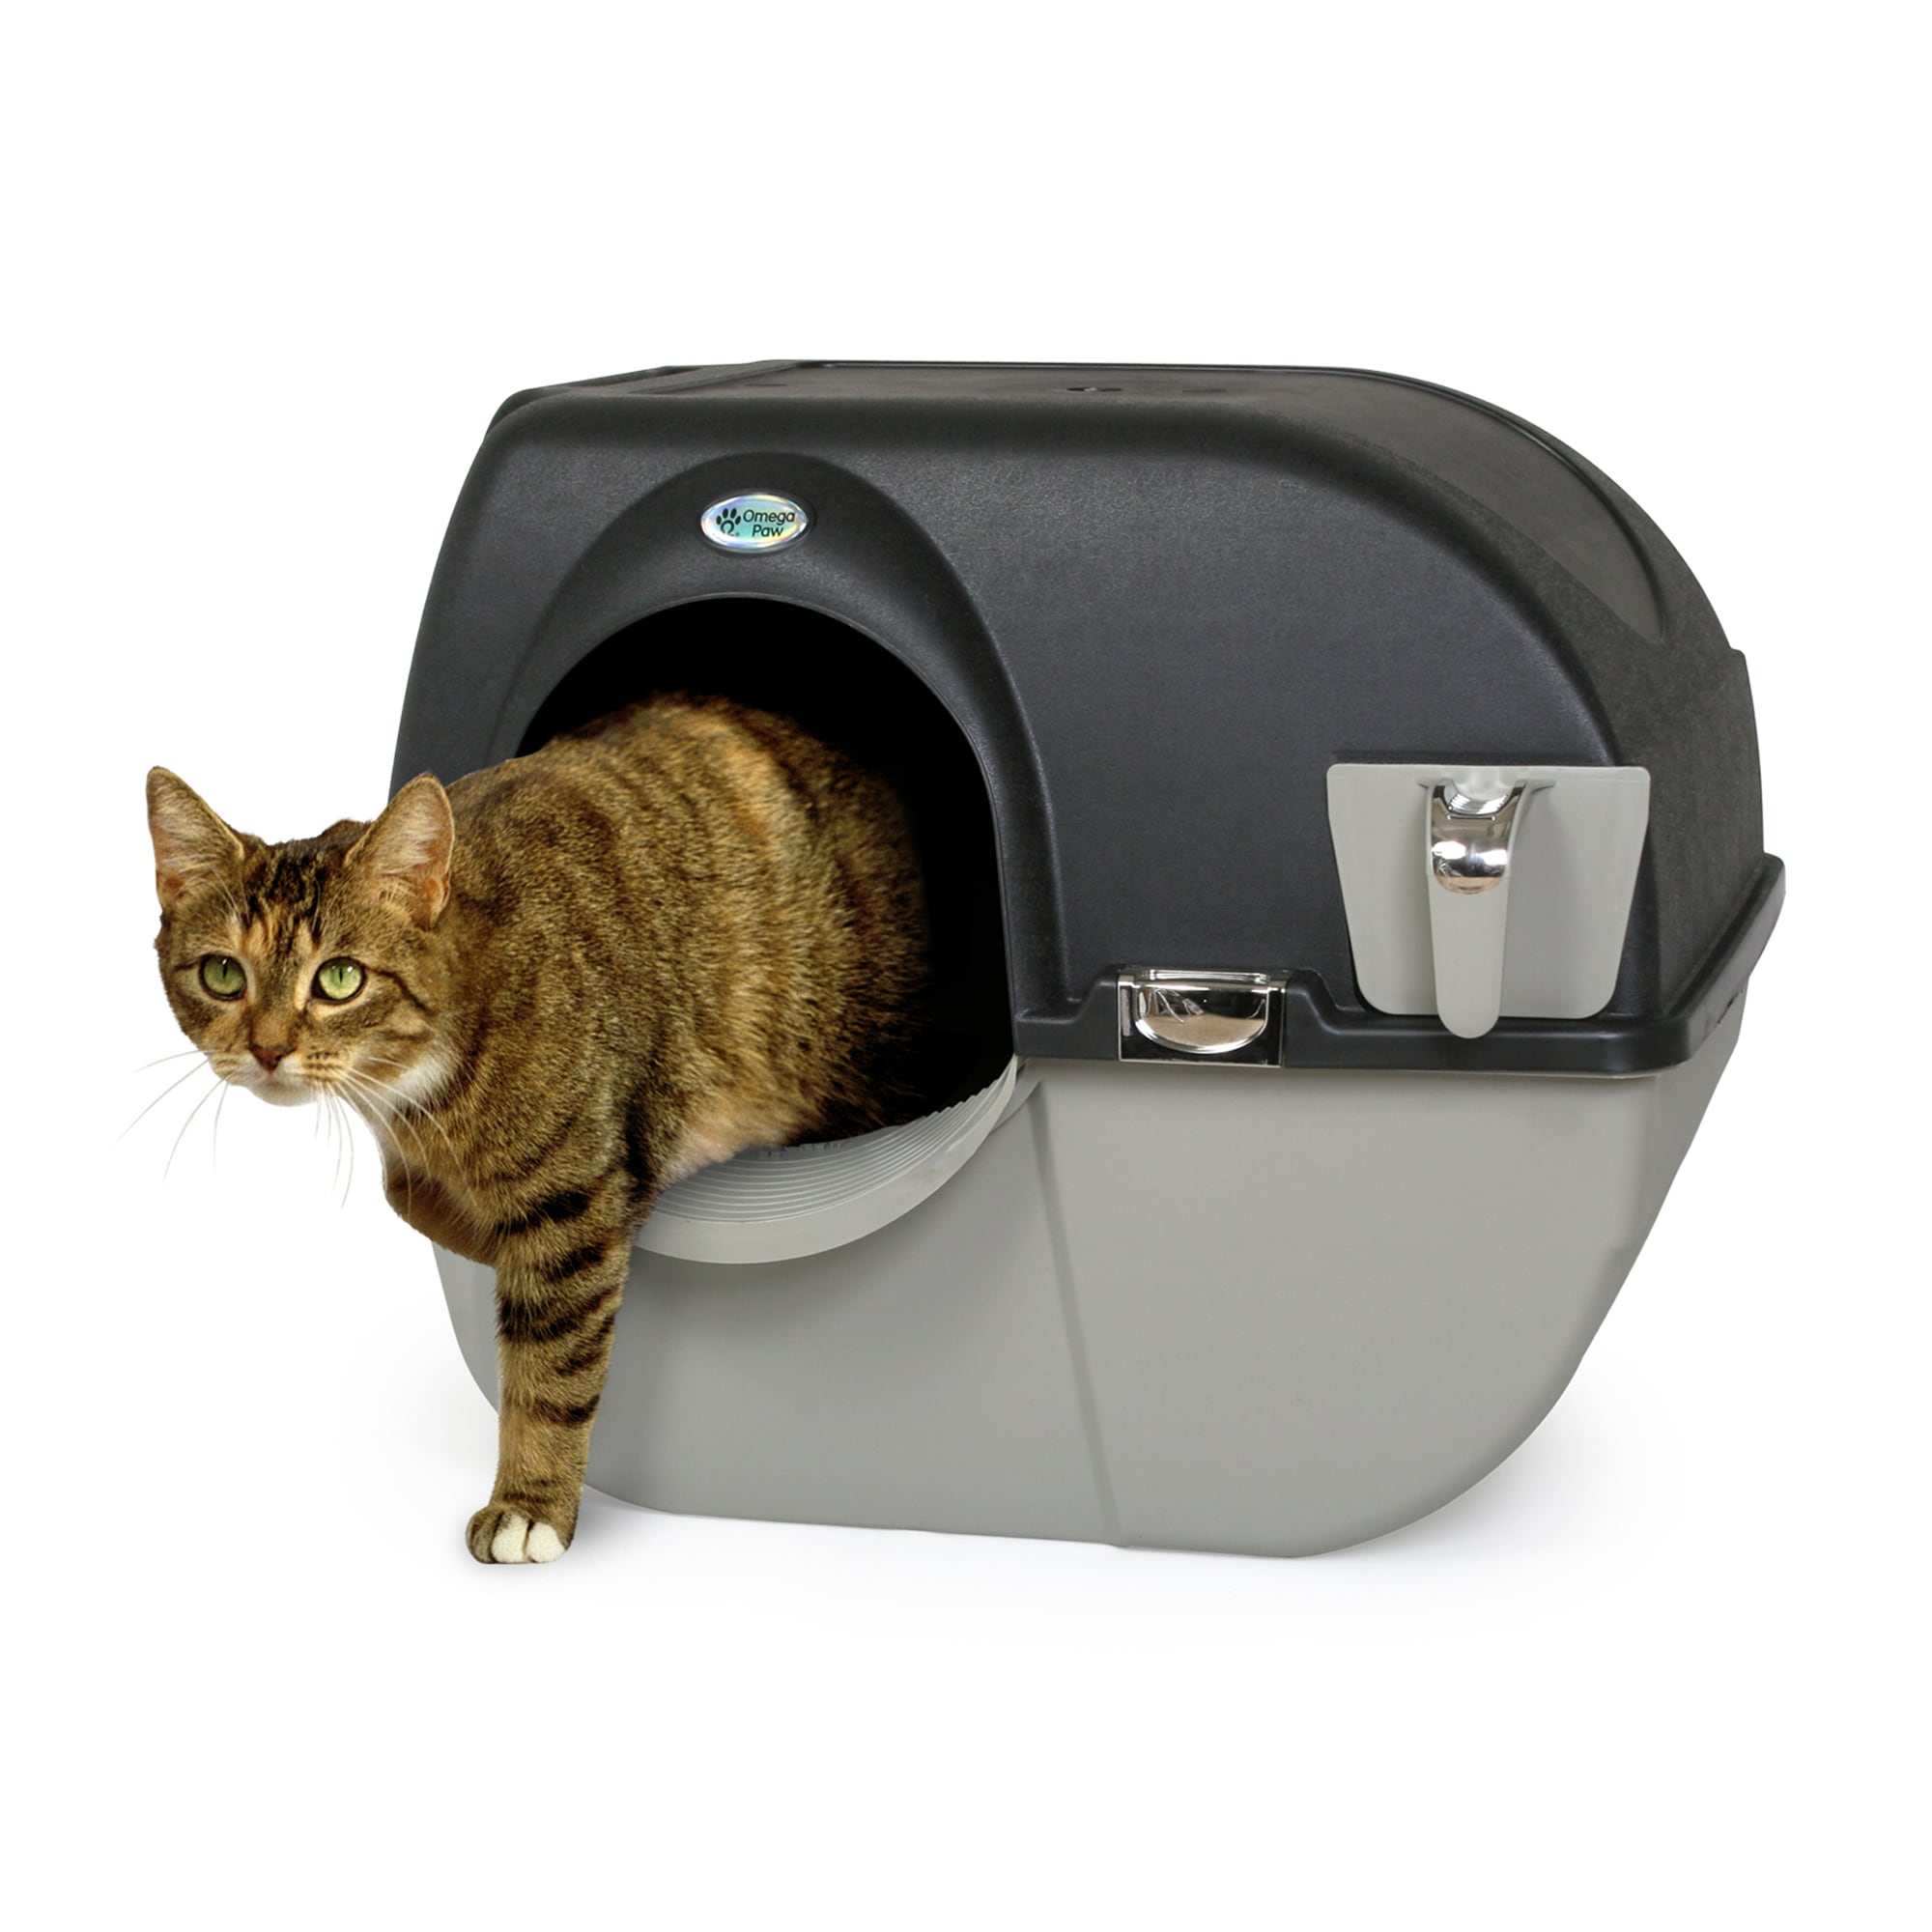 Omega Paw Enclosed No Scoop Self-Cleaning Litter Box & Paw Cleaning Mat for Cats